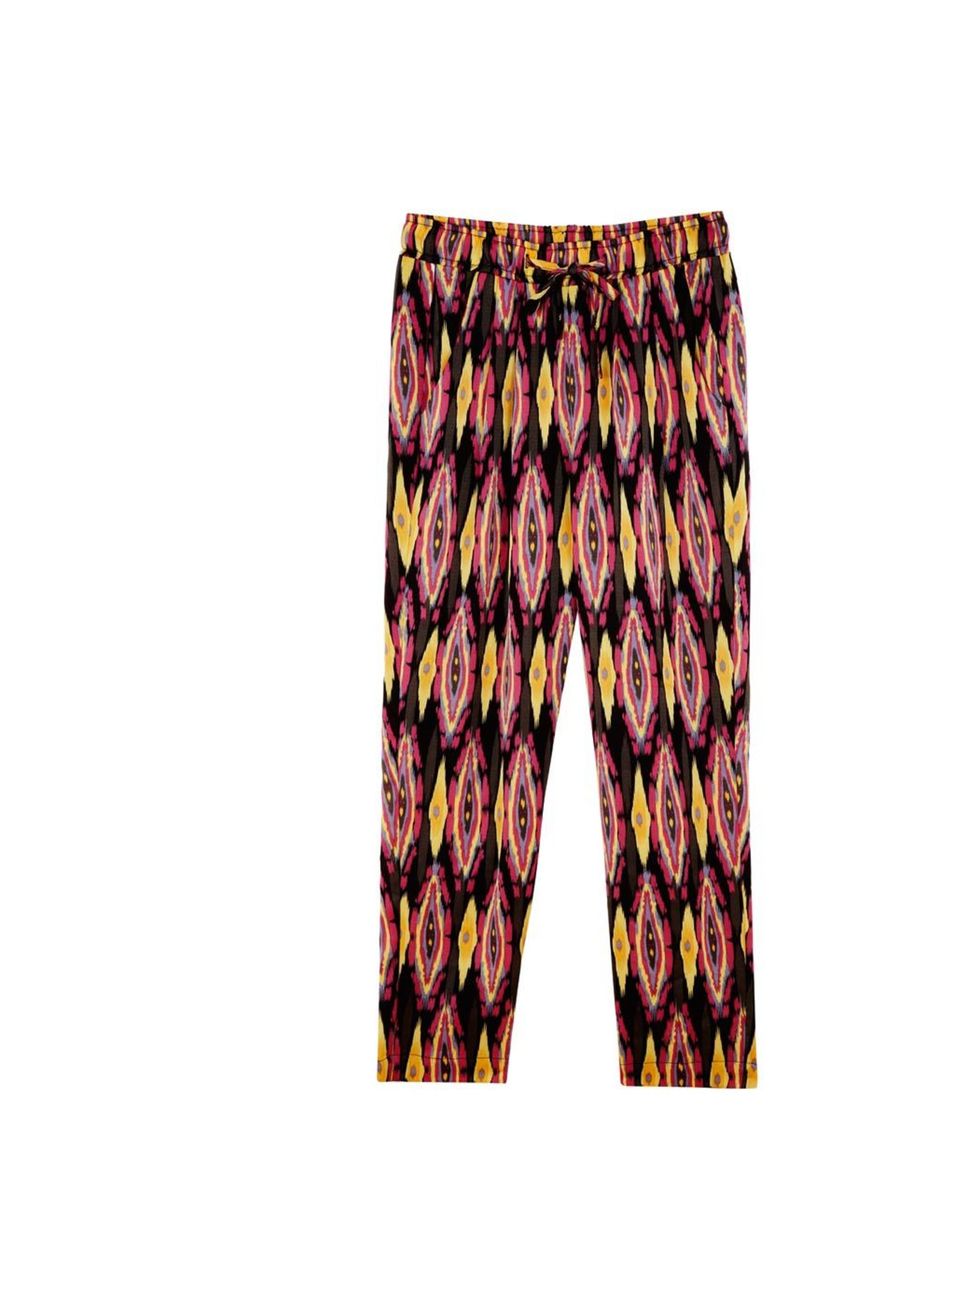 <p>Vaudeville &amp; Burlesque printed trousers, £65, at Urban Outfitters, for stockists call 0203 219 1944</p>